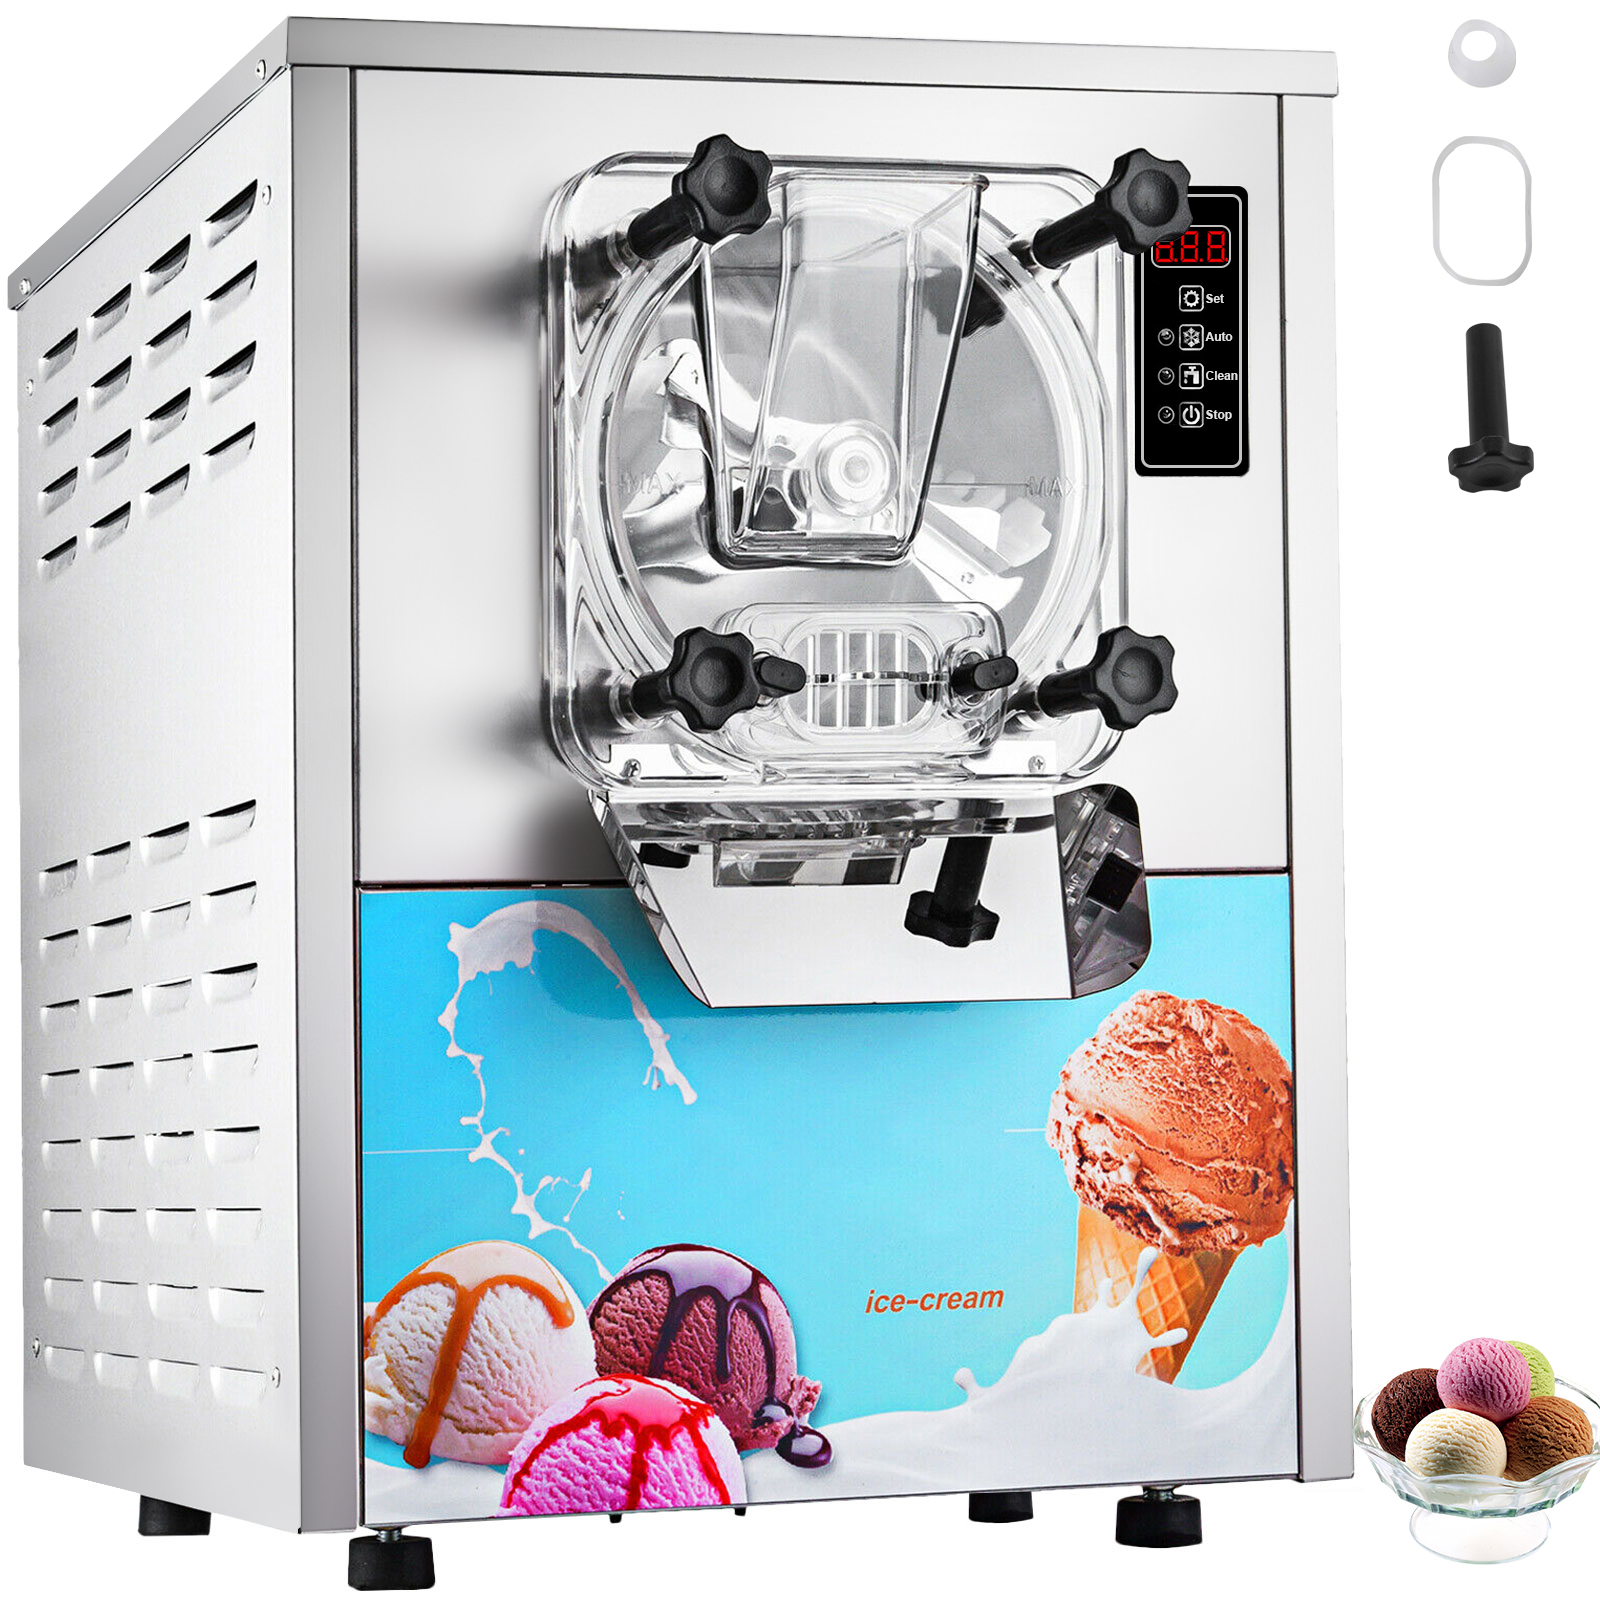 VEVOR 2200W Commercial Soft Ice Cream Machine 3 Flavors 5.3 to 7.4Gallon per Hour precooling at Night Auto Clean LCD Panel for Restaurants Snack Bar